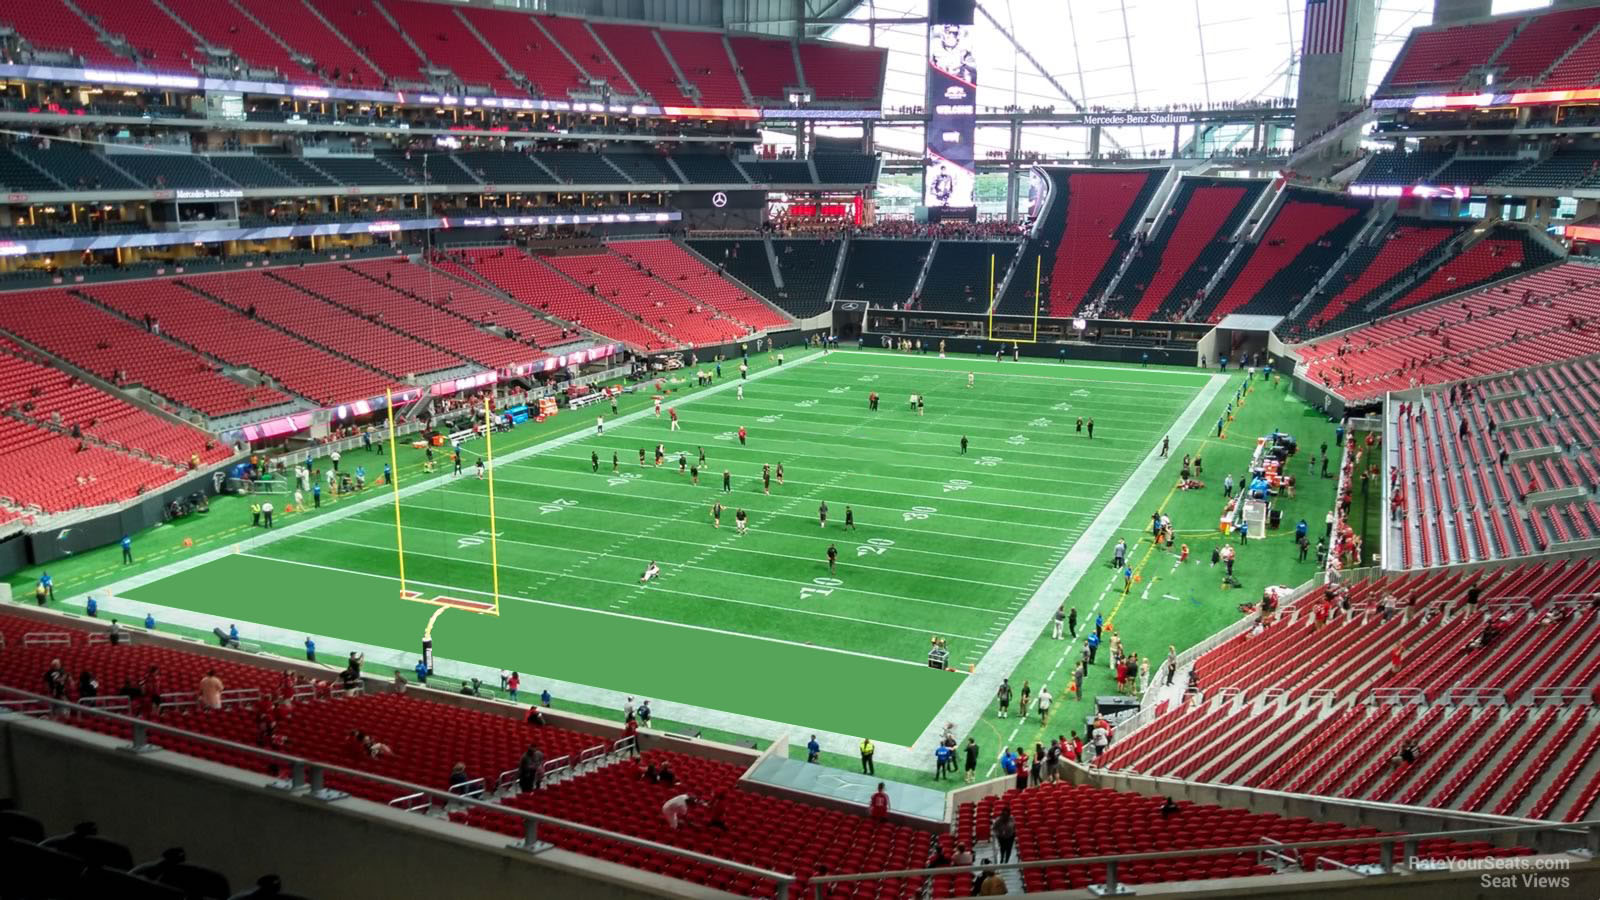 section 221, row 6 seat view  for football - mercedes-benz stadium